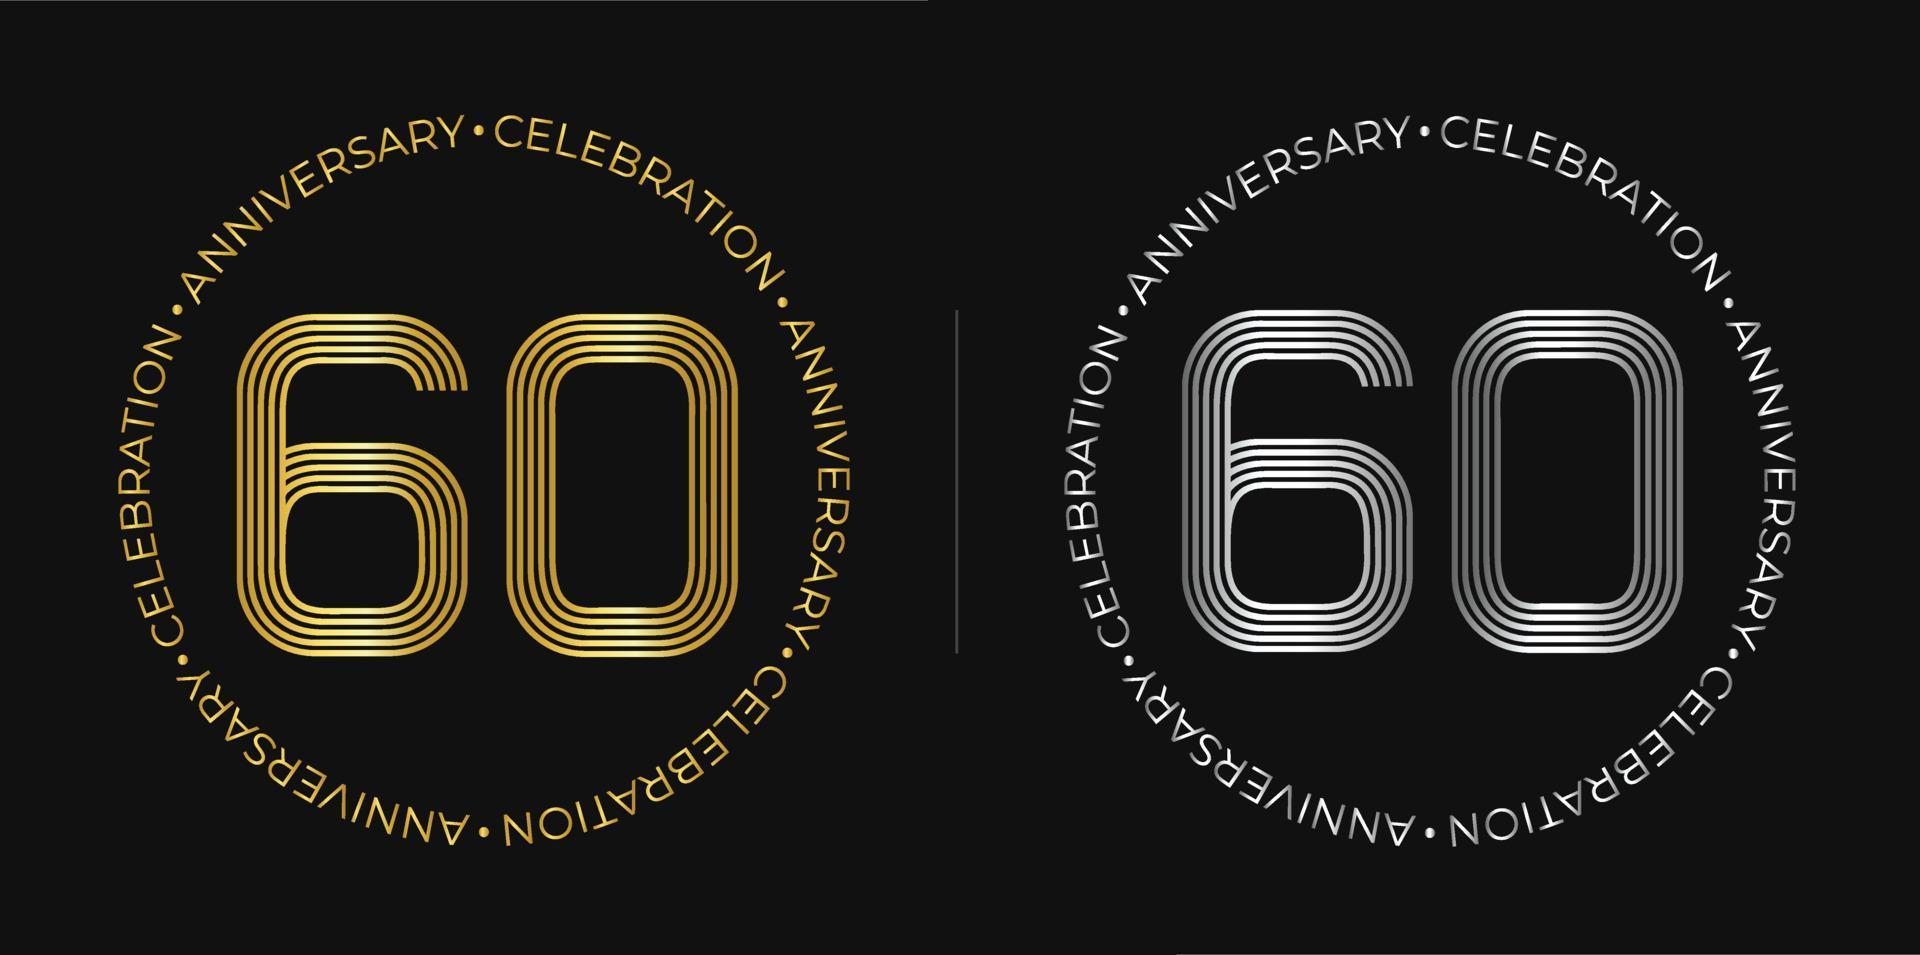 60th birthday. Sixty years anniversary celebration banner in golden and silver colors. Circular logo with original numbers design in elegant lines. vector